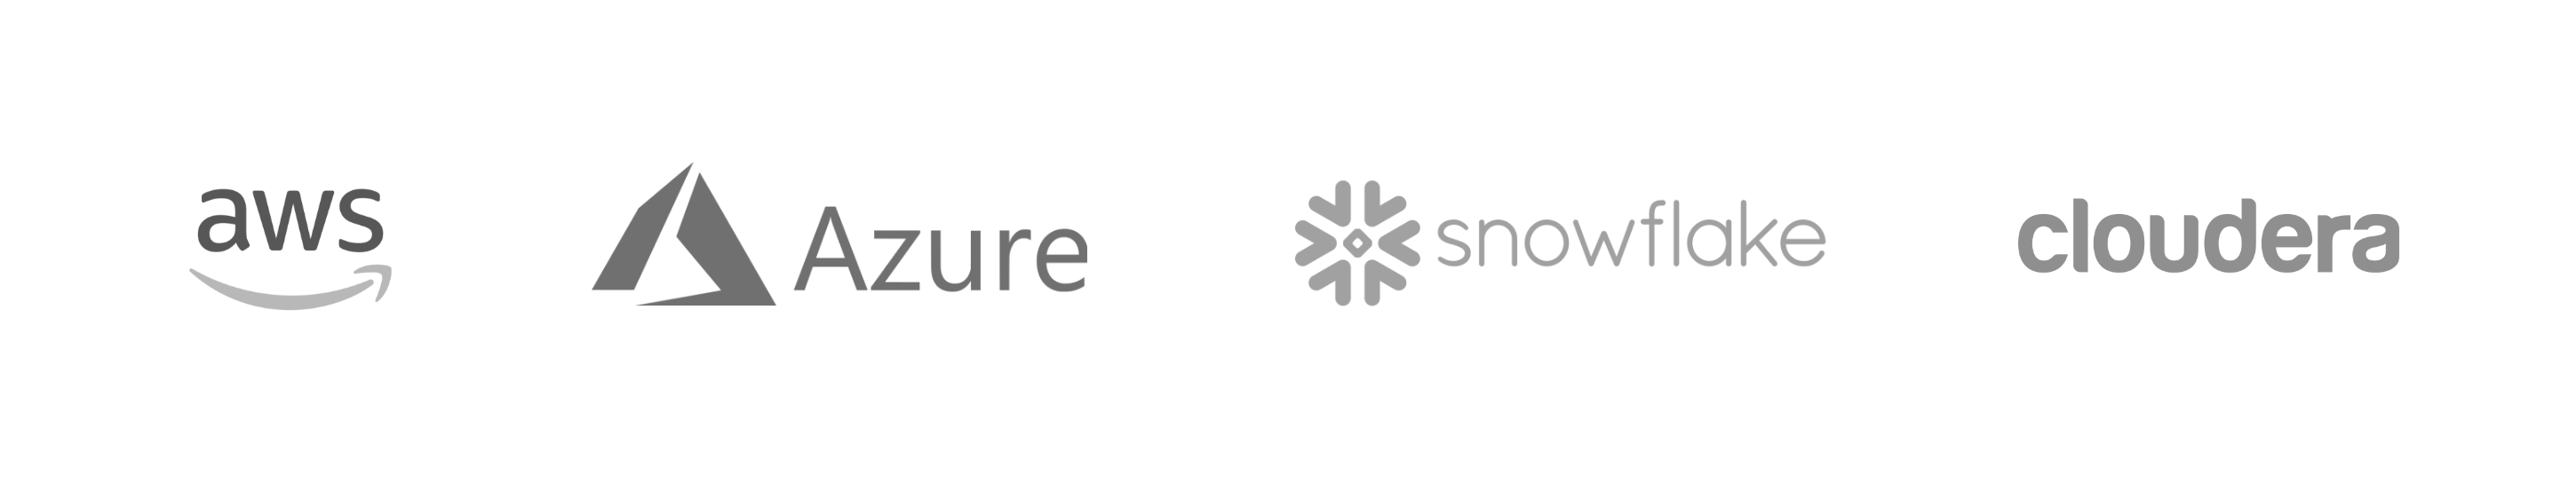 logos of cloud services